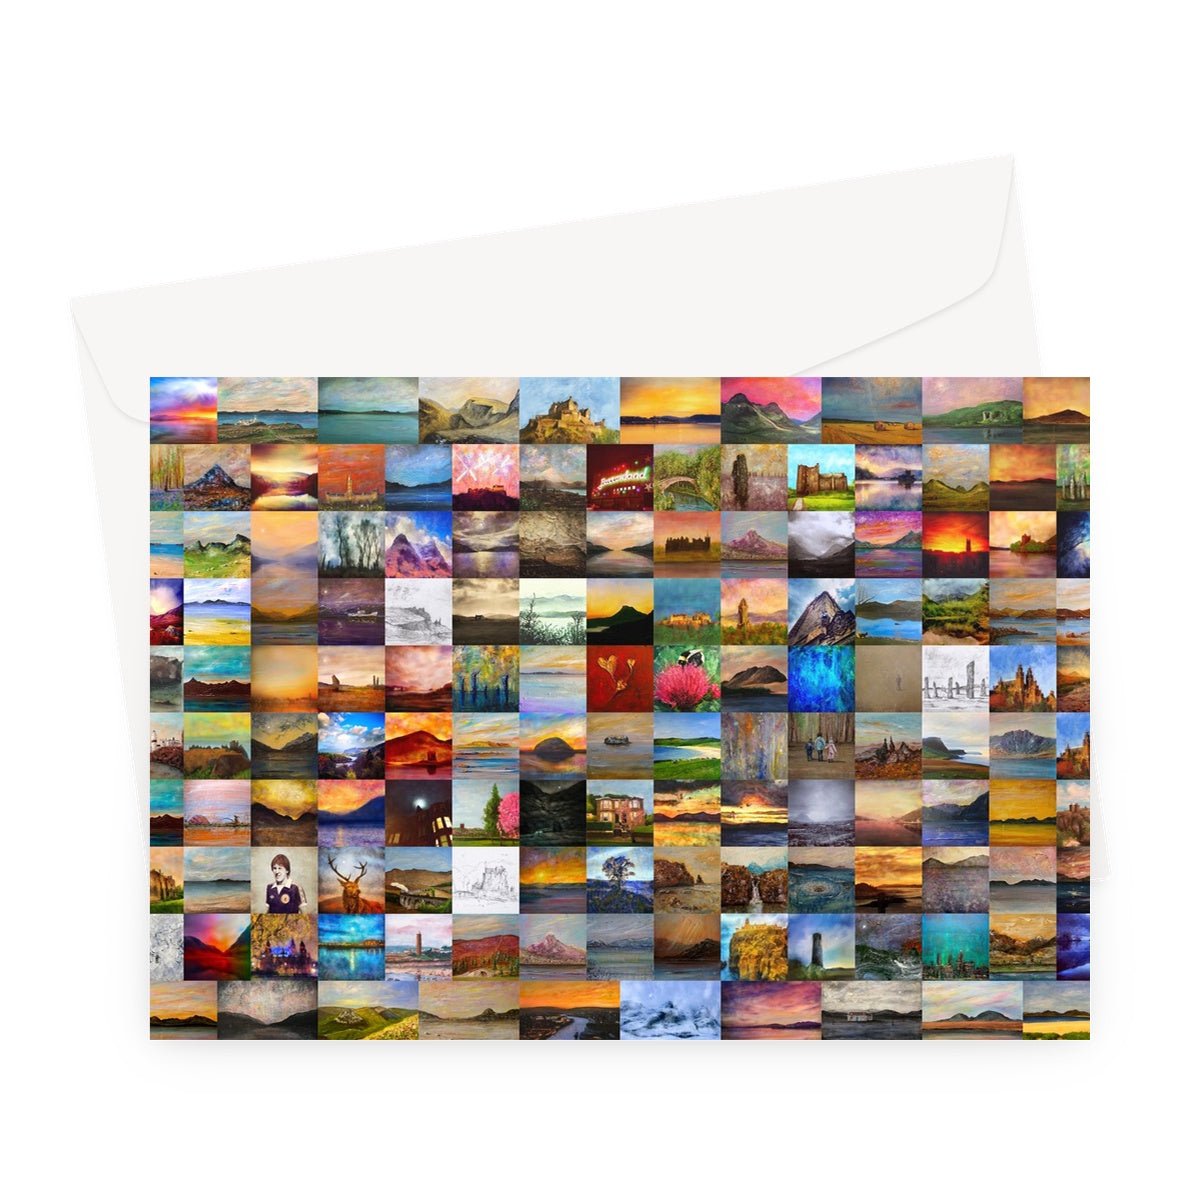 Scottish Artist Hunter Art Collage Greeting Card-Greetings Cards-Scottish Artist Hunter-A5 Landscape-10 Cards-Paintings, Prints, Homeware, Art Gifts From Scotland By Scottish Artist Kevin Hunter